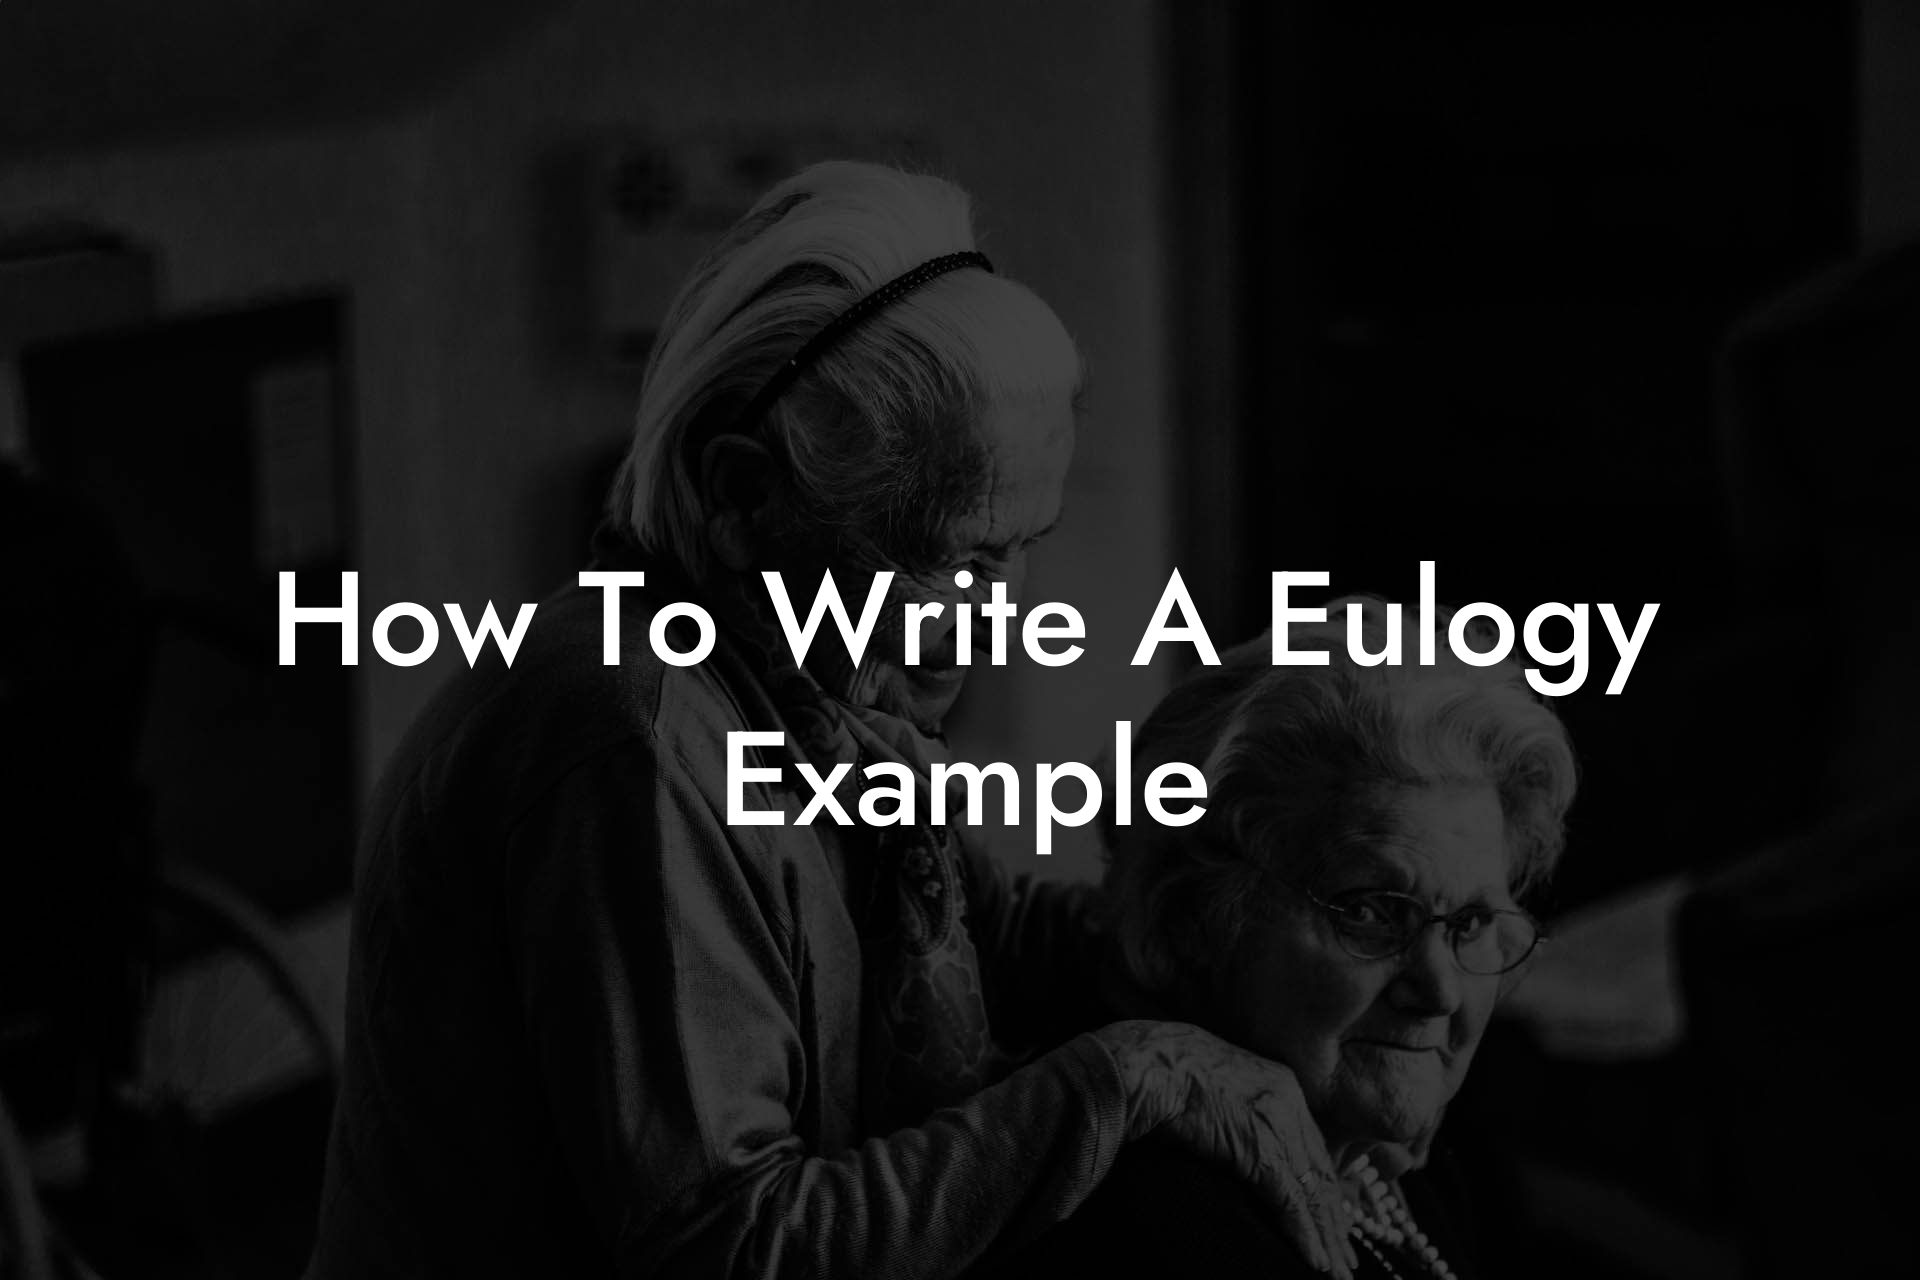 How To Write A Eulogy Example